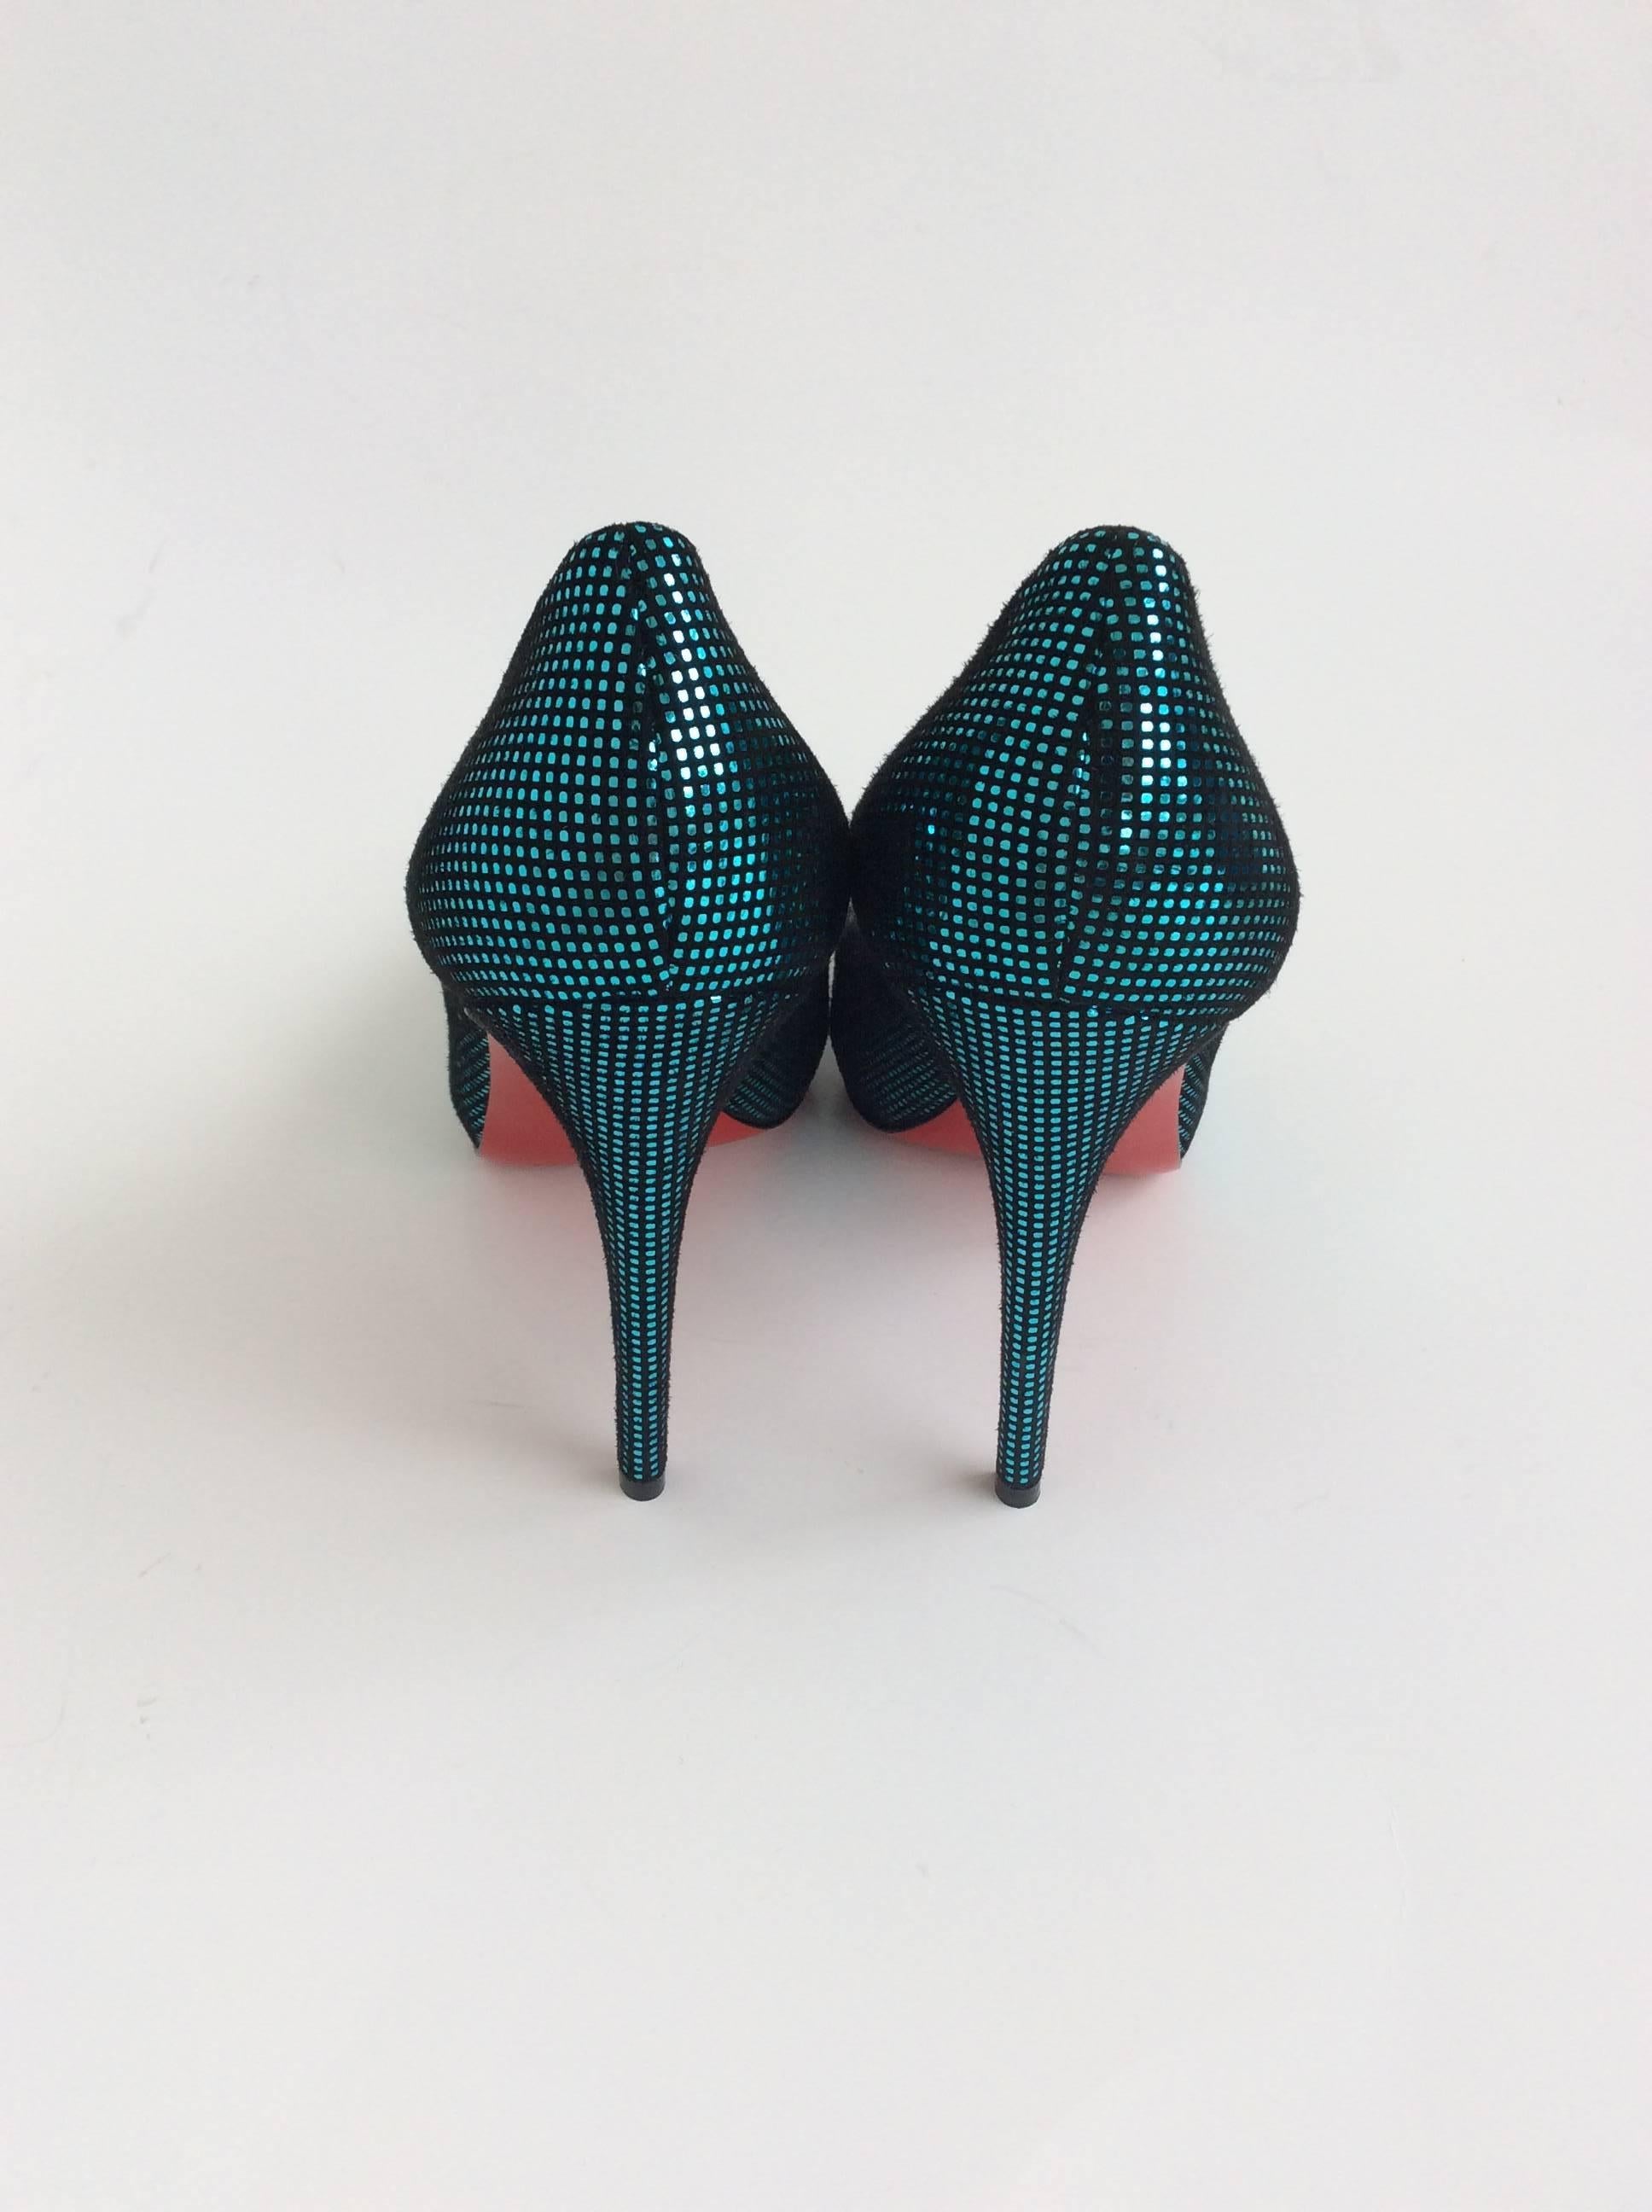 Christian Louboutin Metallic Green Imprinted Suede Round-Toe Pump Sz 40.5/Us10.5 In New Condition For Sale In San Francisco, CA